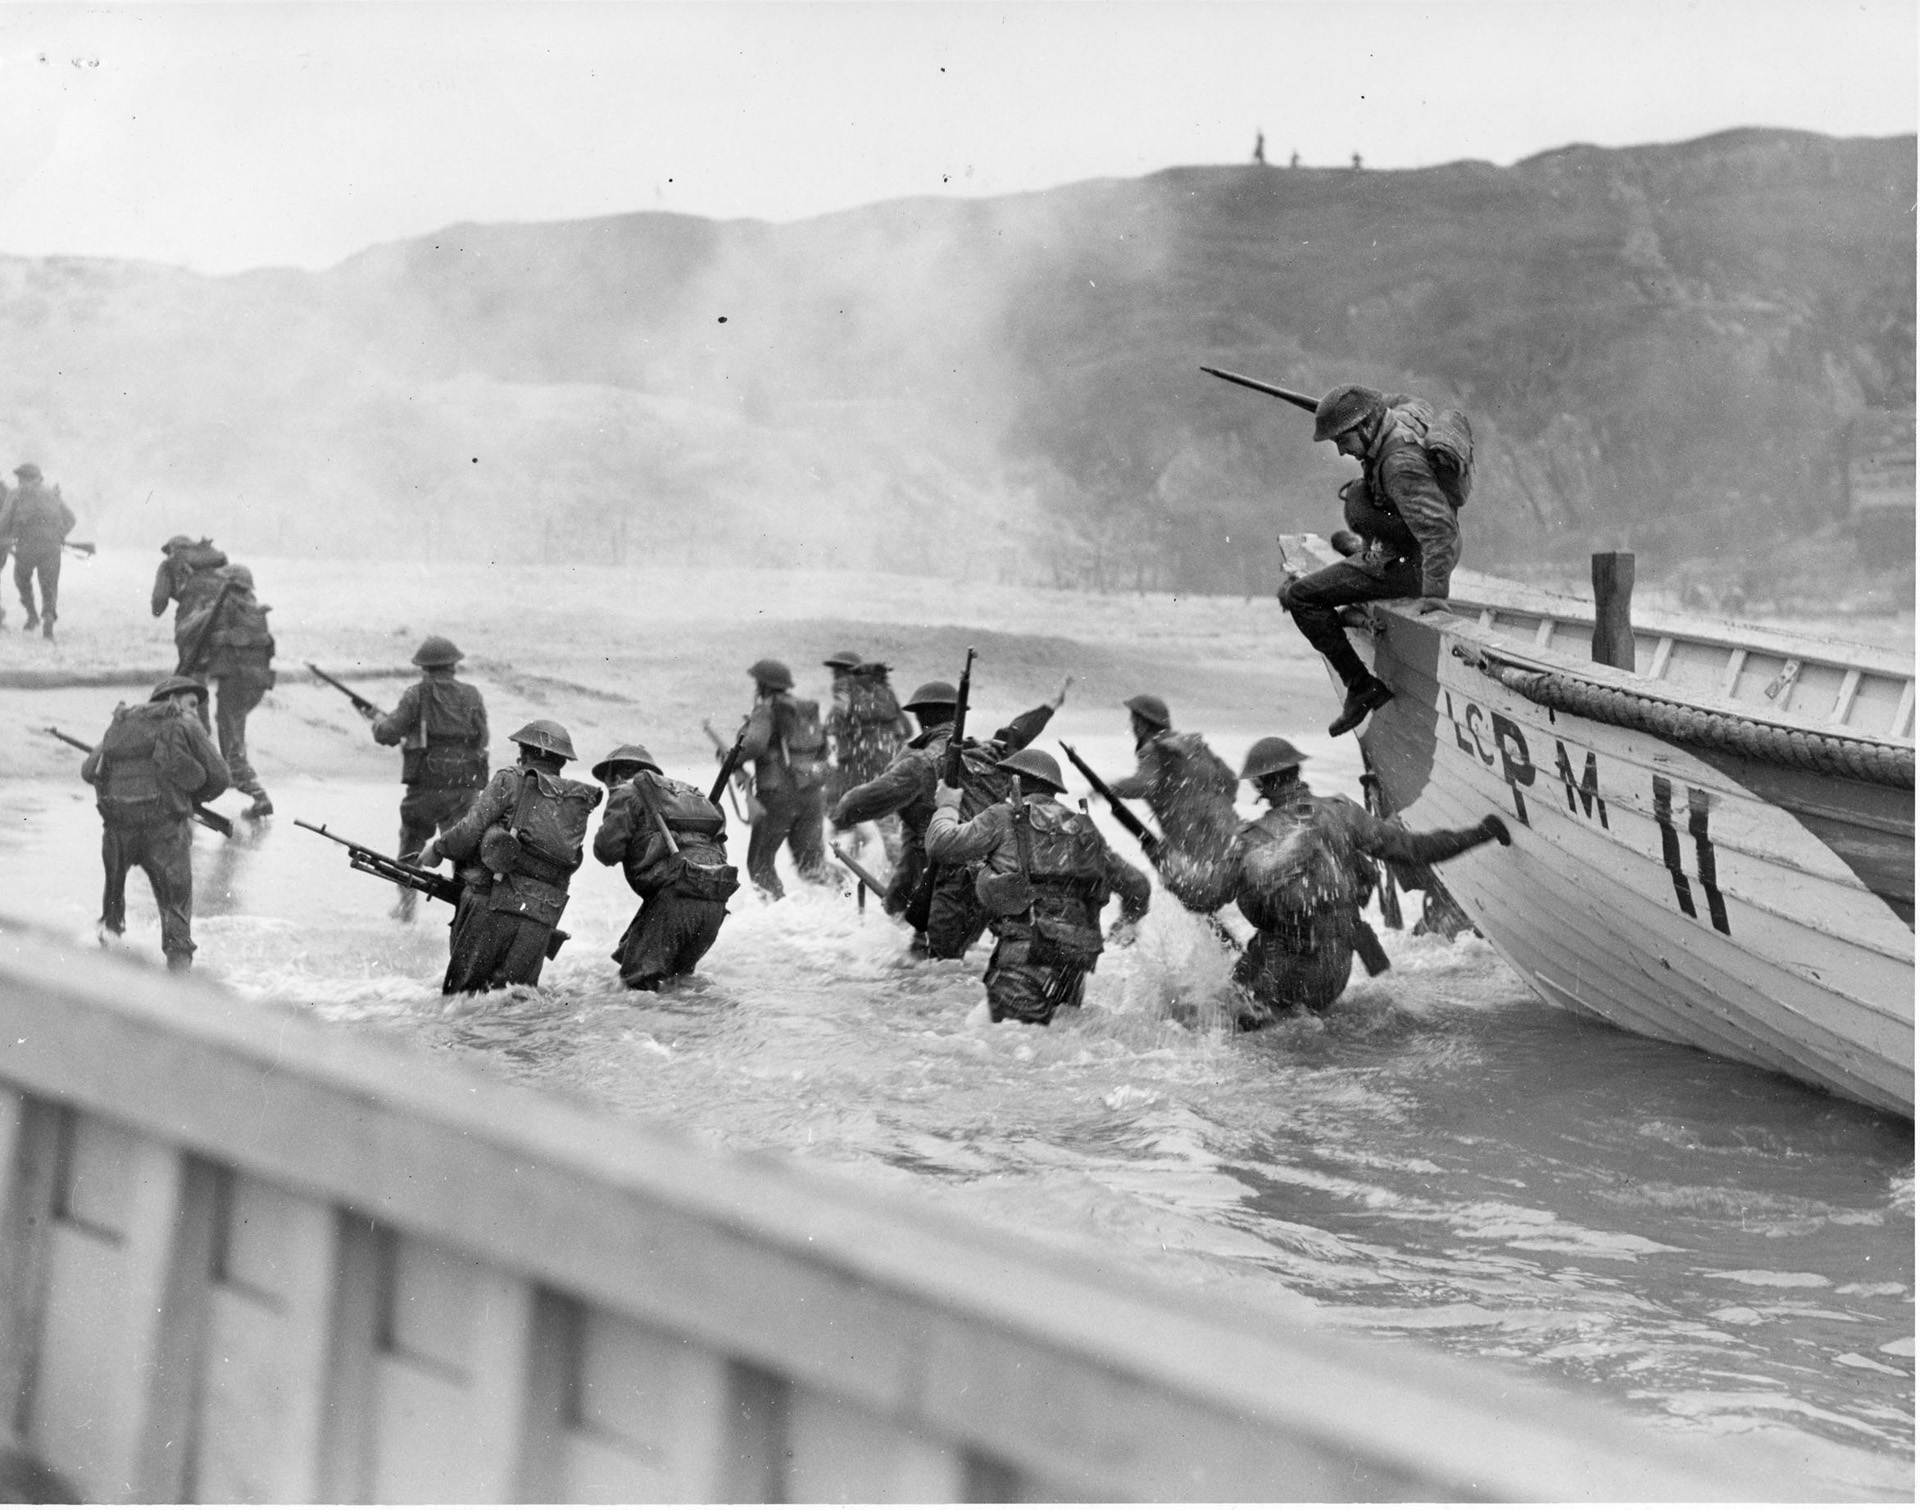 Canadian troops rehearse for Operation Overlord at the Slapton Sands training area in Devon, England. They are disembarking from wooden lifeboats rather than the military landing craft they will come ashore in on D-Day.